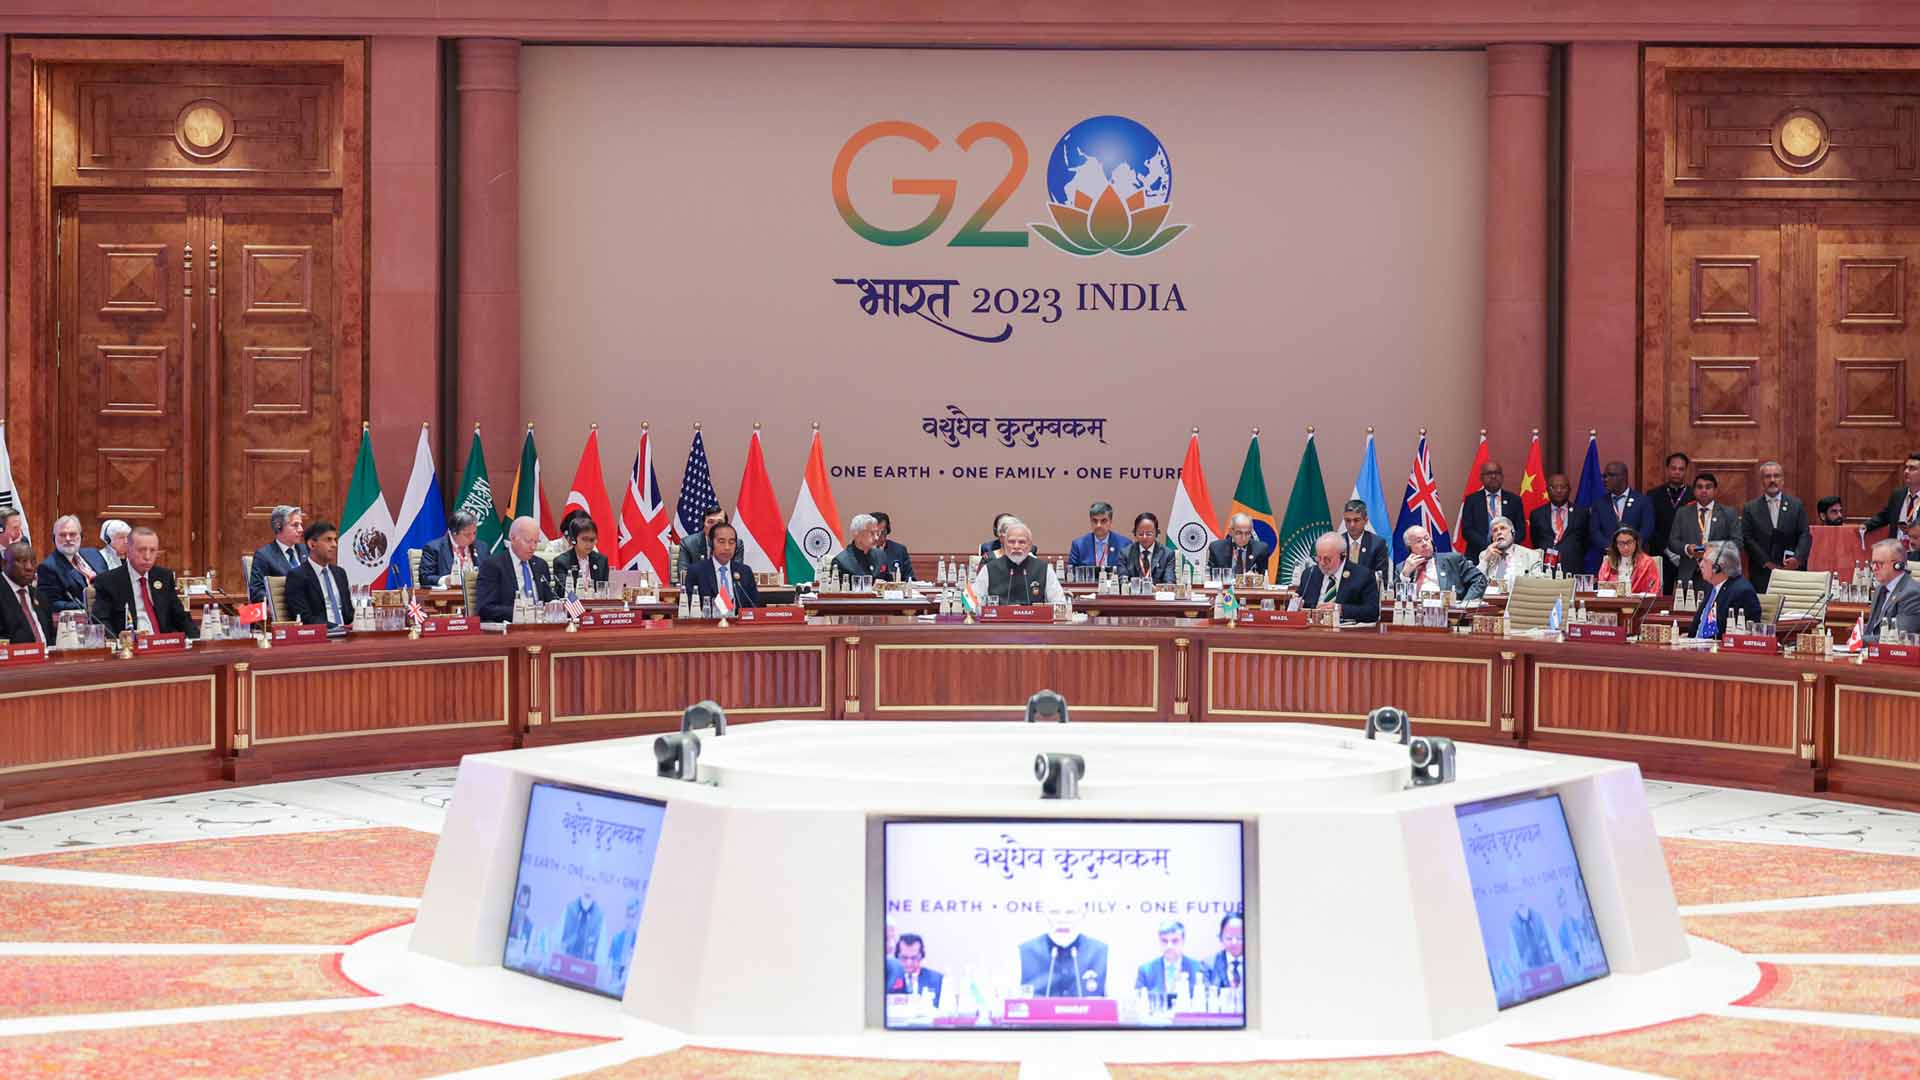 African Union Inducted into G20 on India’s Initiative